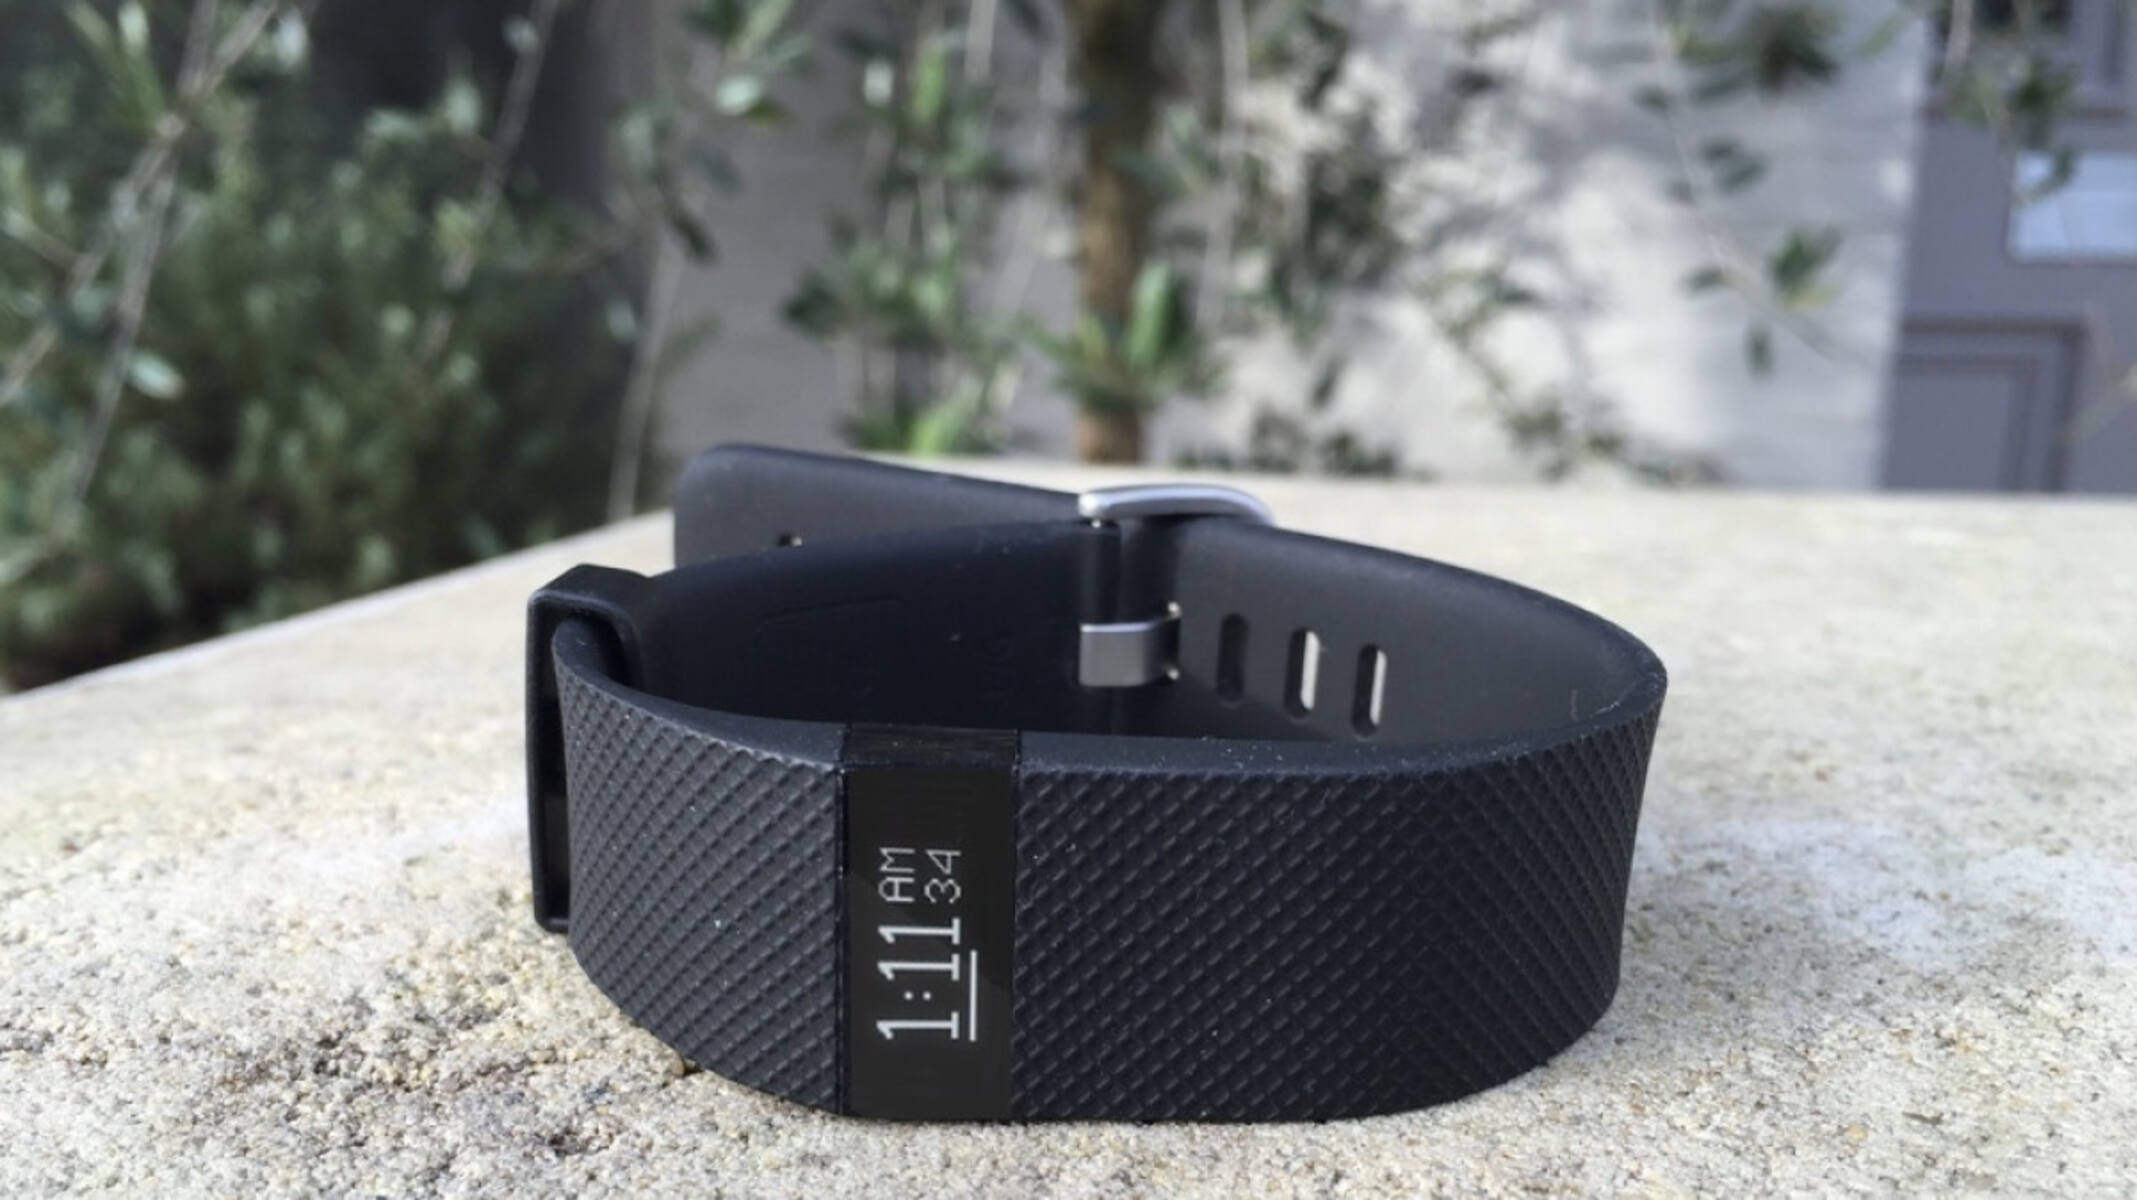 Charging Confirmation: Verifying Fitbit Charge HR Charging Status